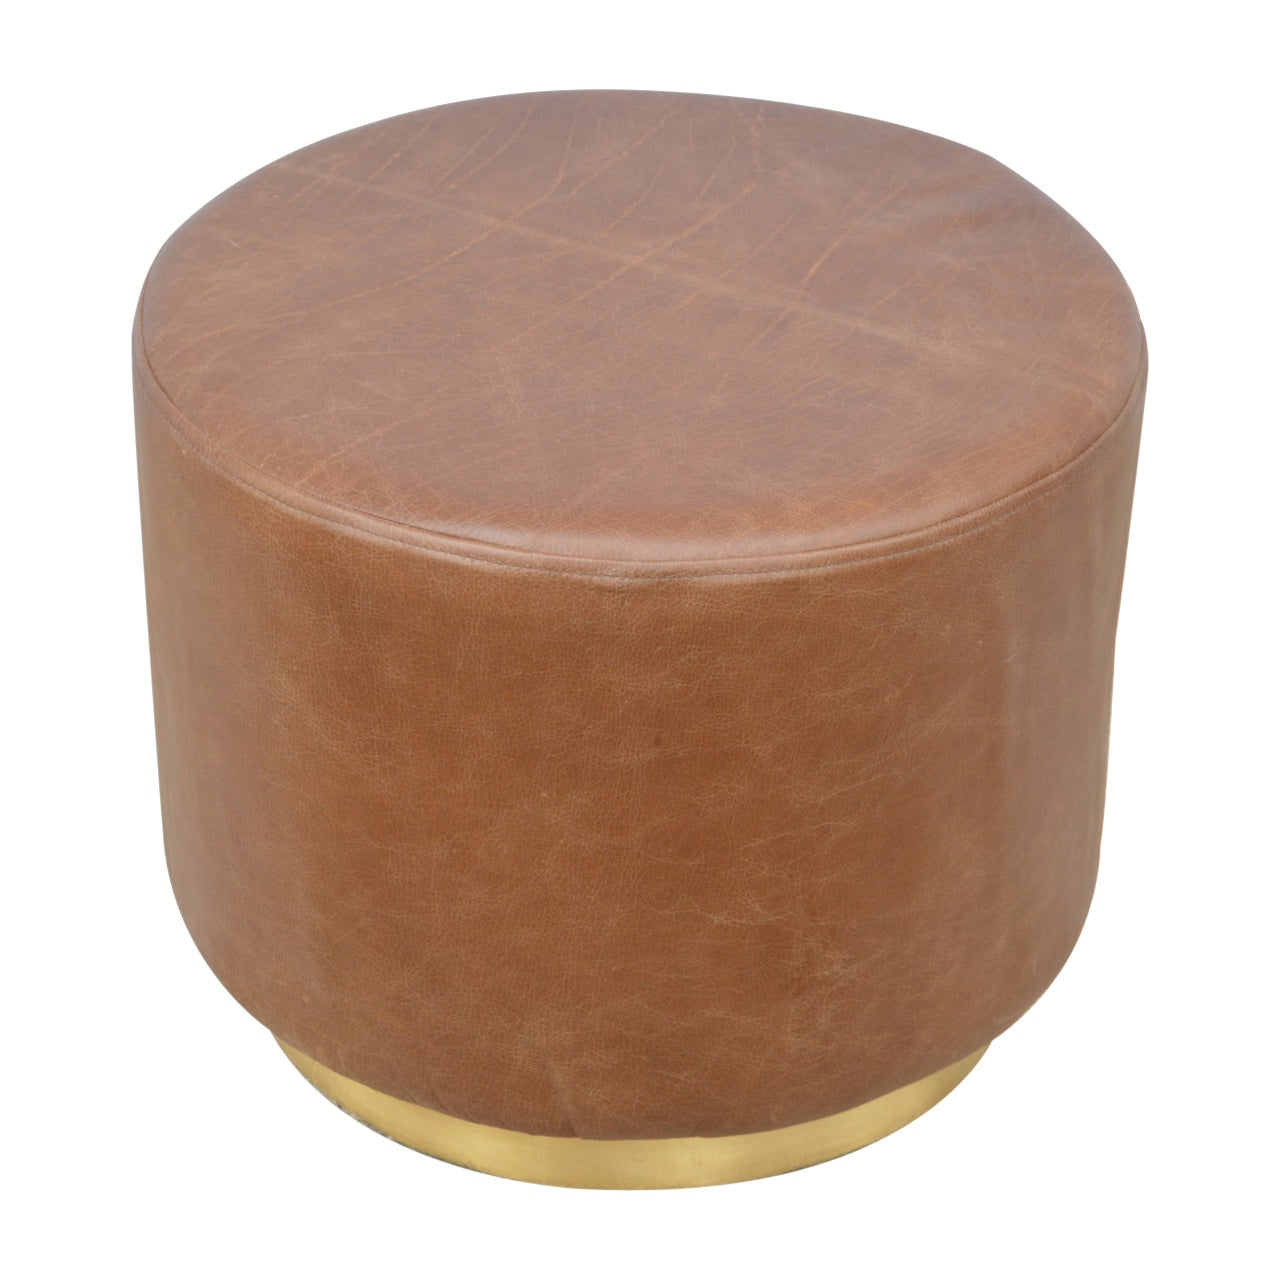 View Buffalo Footstool with Gold Base information